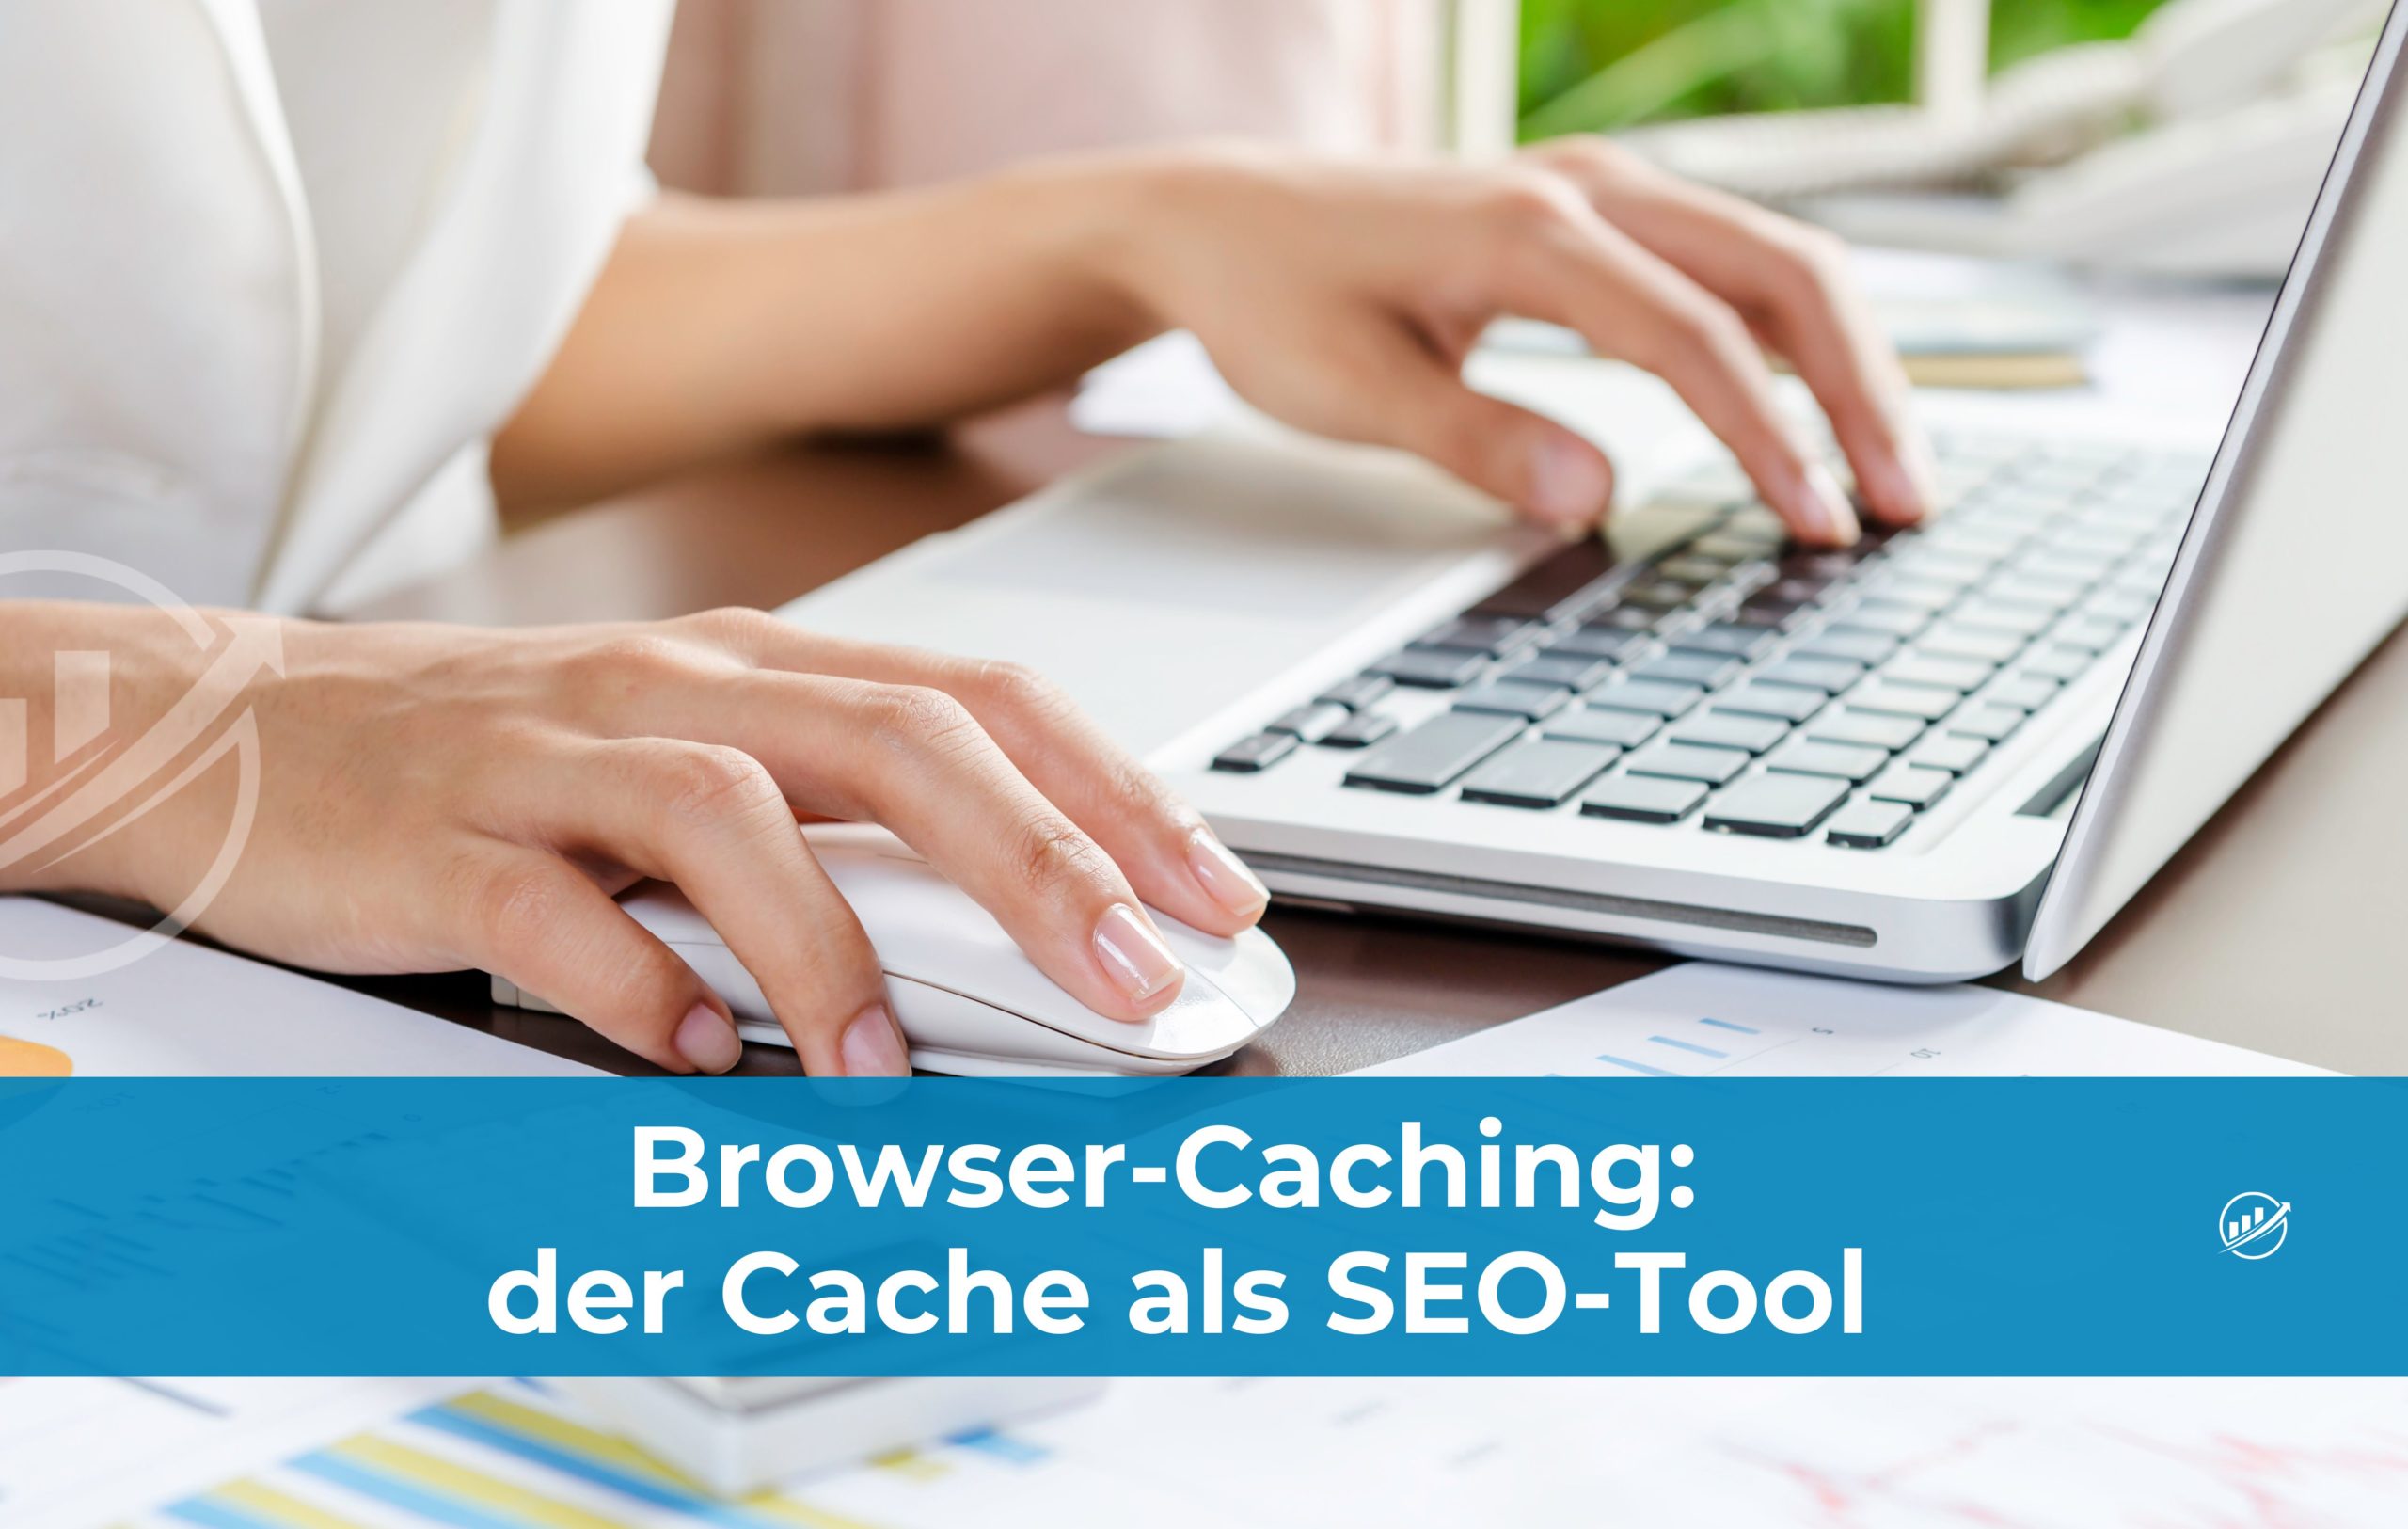 Browser-Caching: der Cache als SEO-Tool